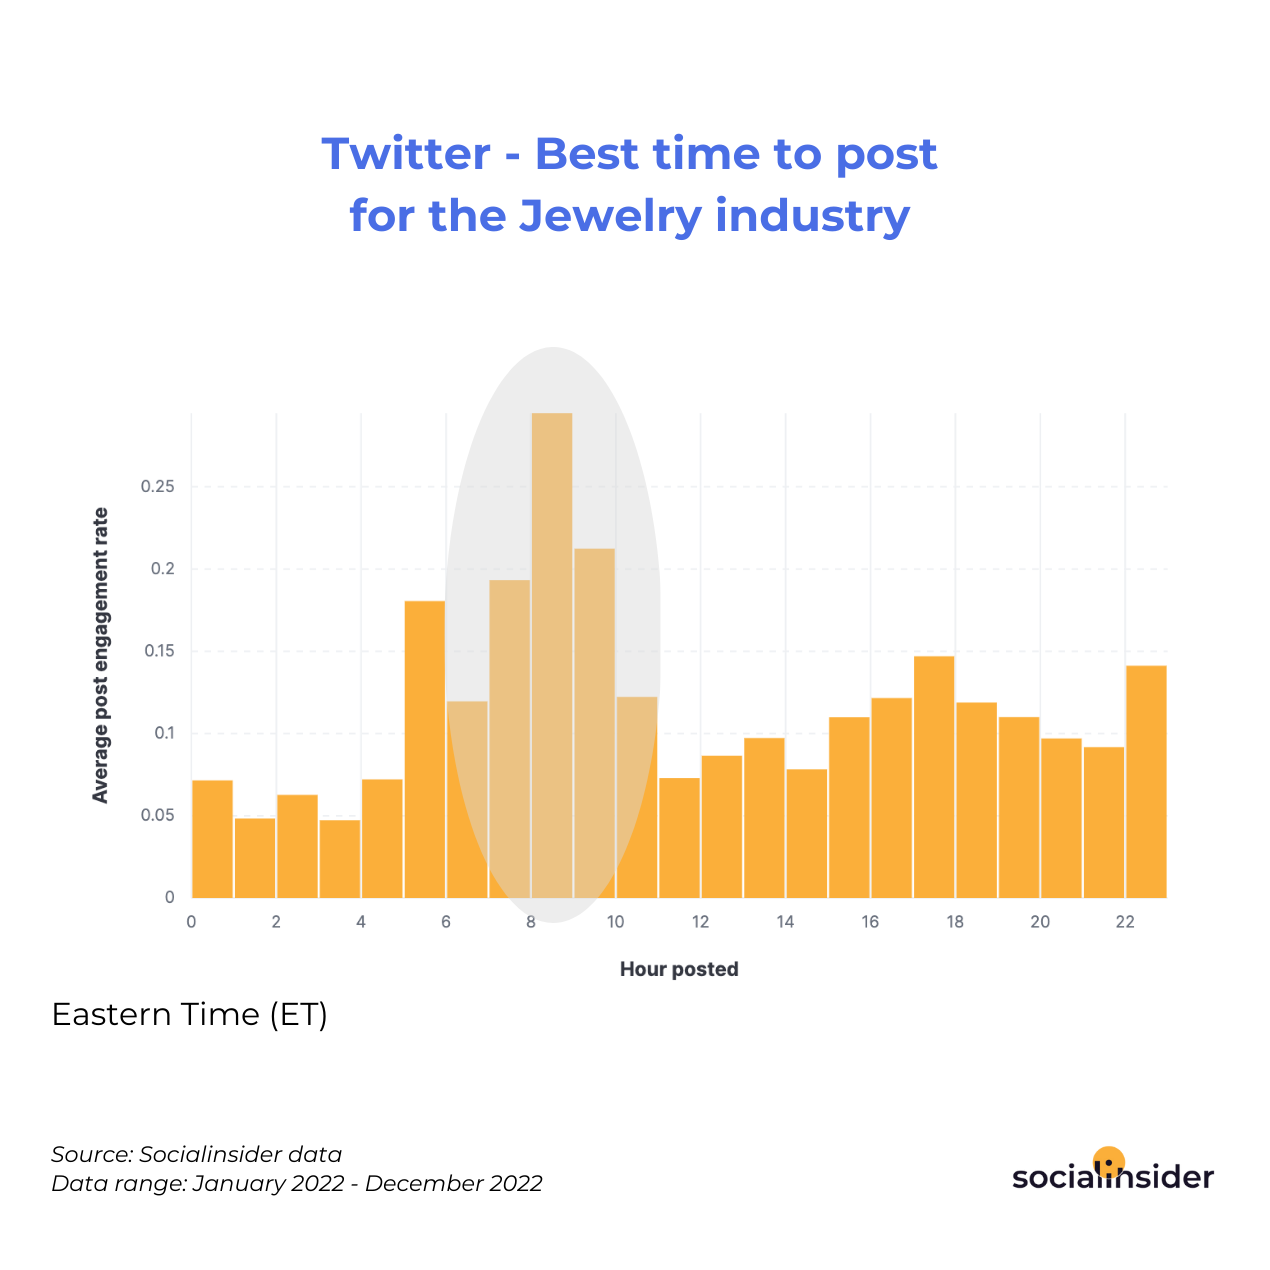 Twitter - Best time to post for the Jewelry industry 